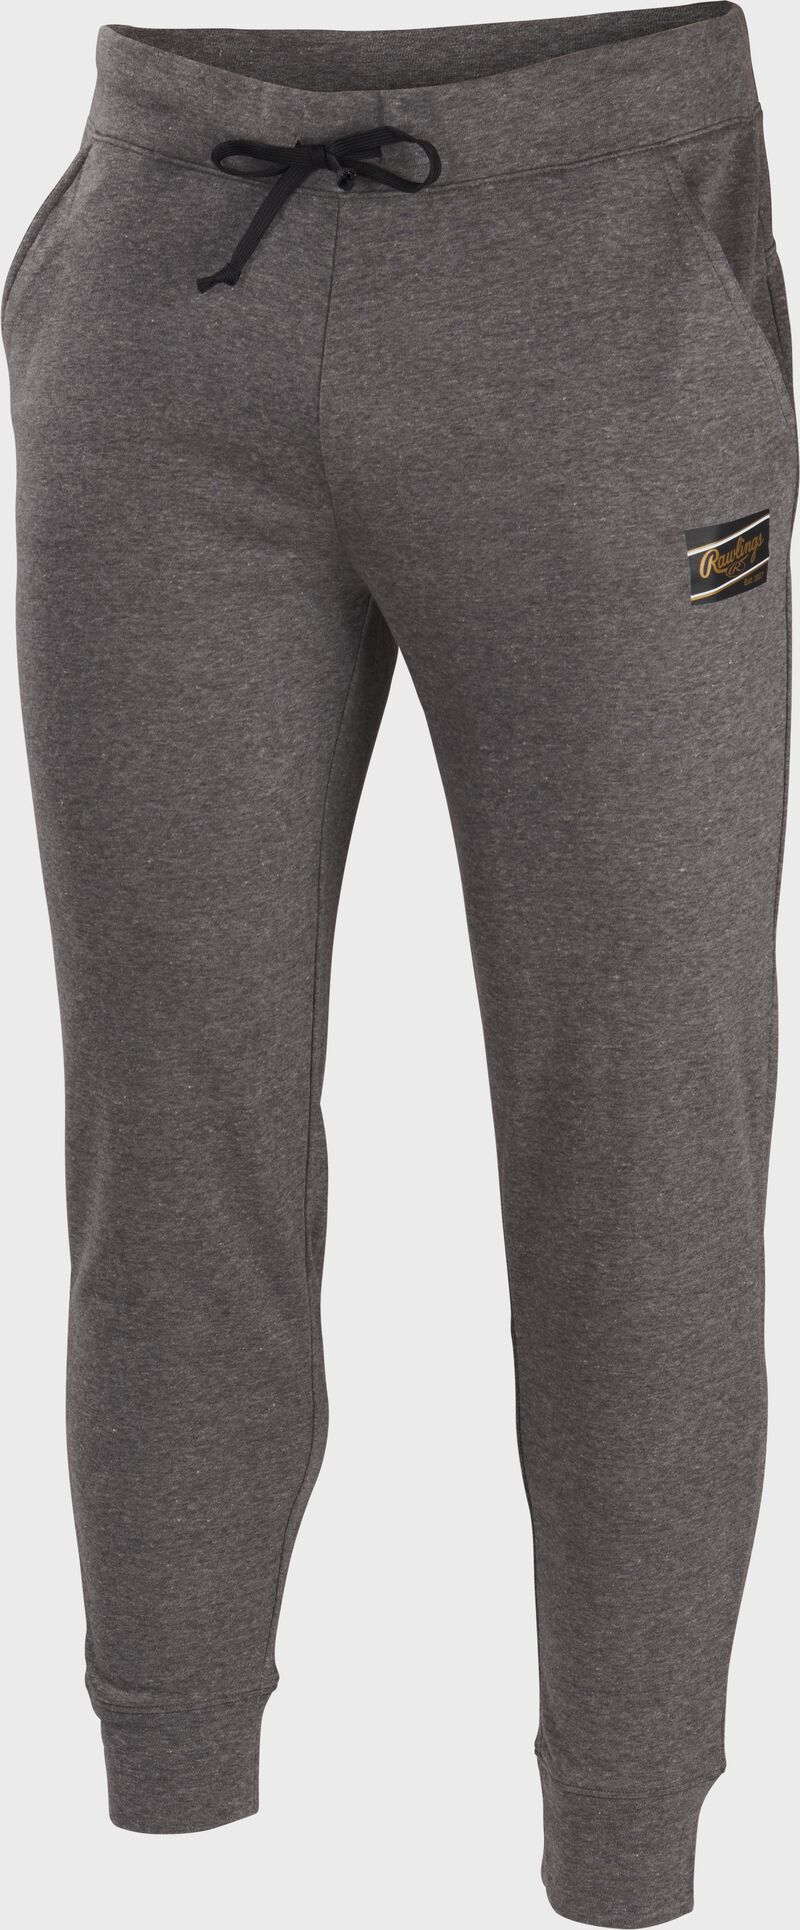 A pair of gray Rawlings women's french terry joggers - SKU: RSGWJG-G loading=